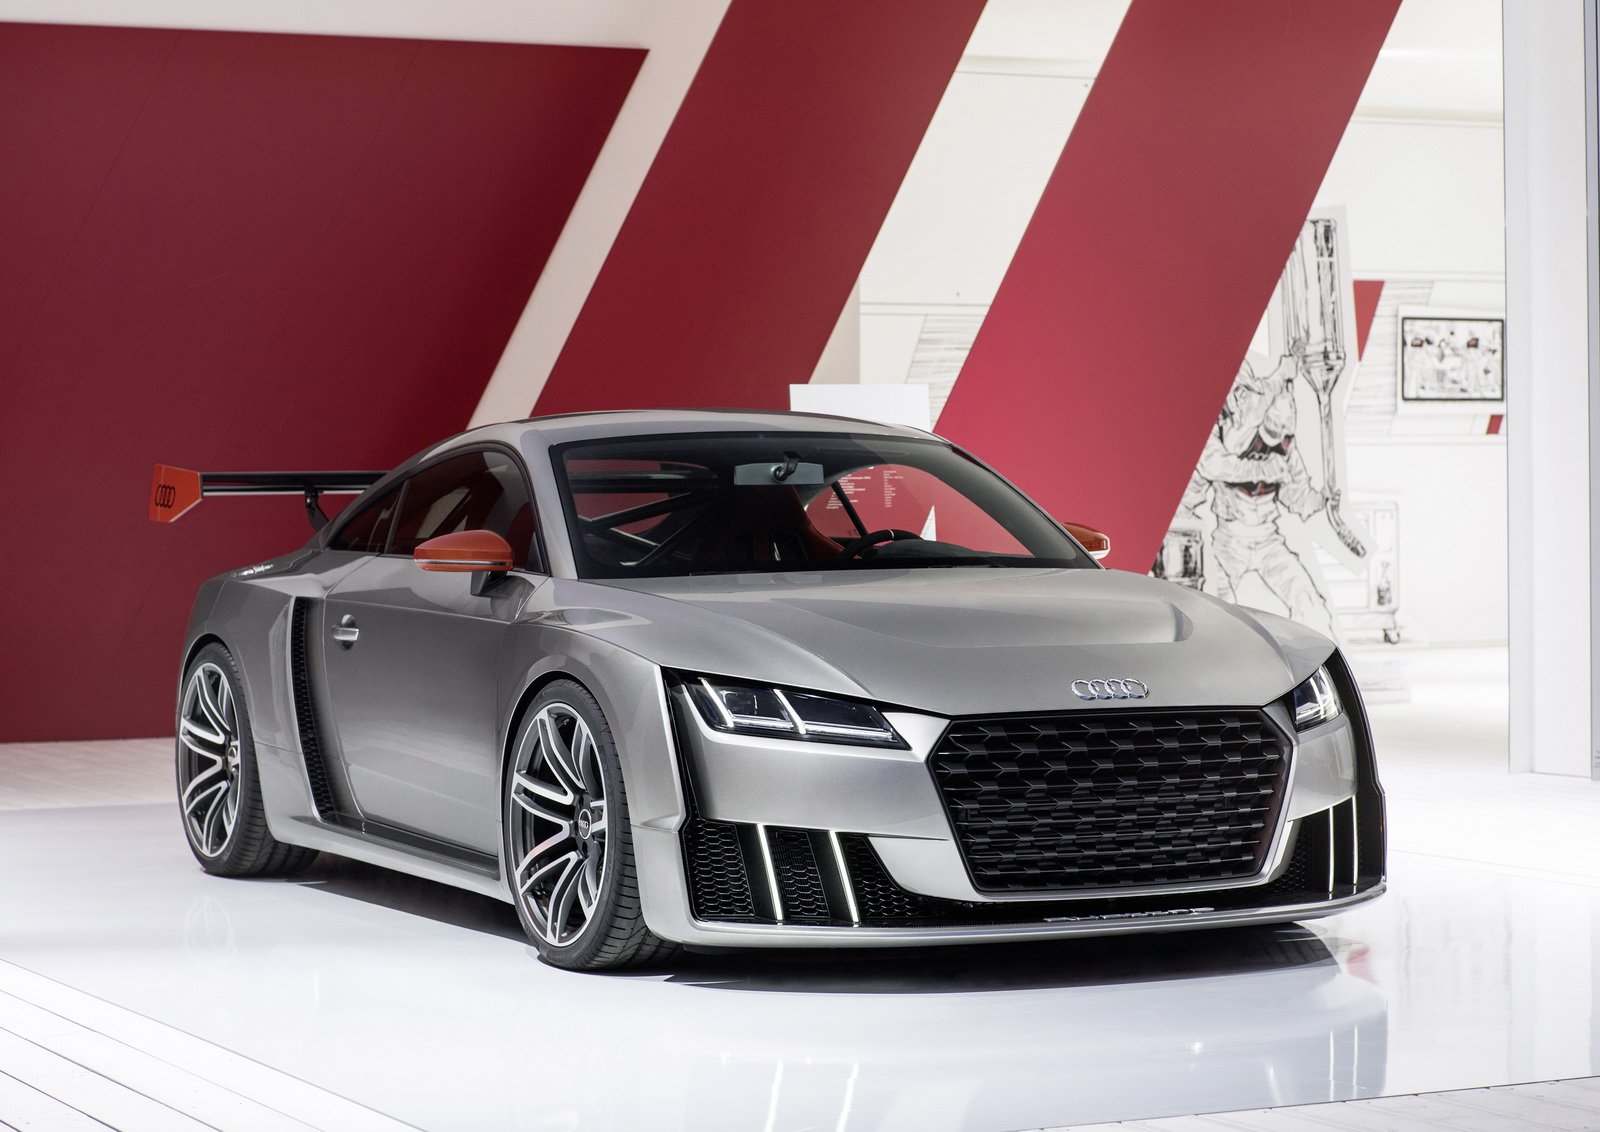 2015, Audi, Cars, Clubsport, Concept, Supercars, Turbo Wallpaper